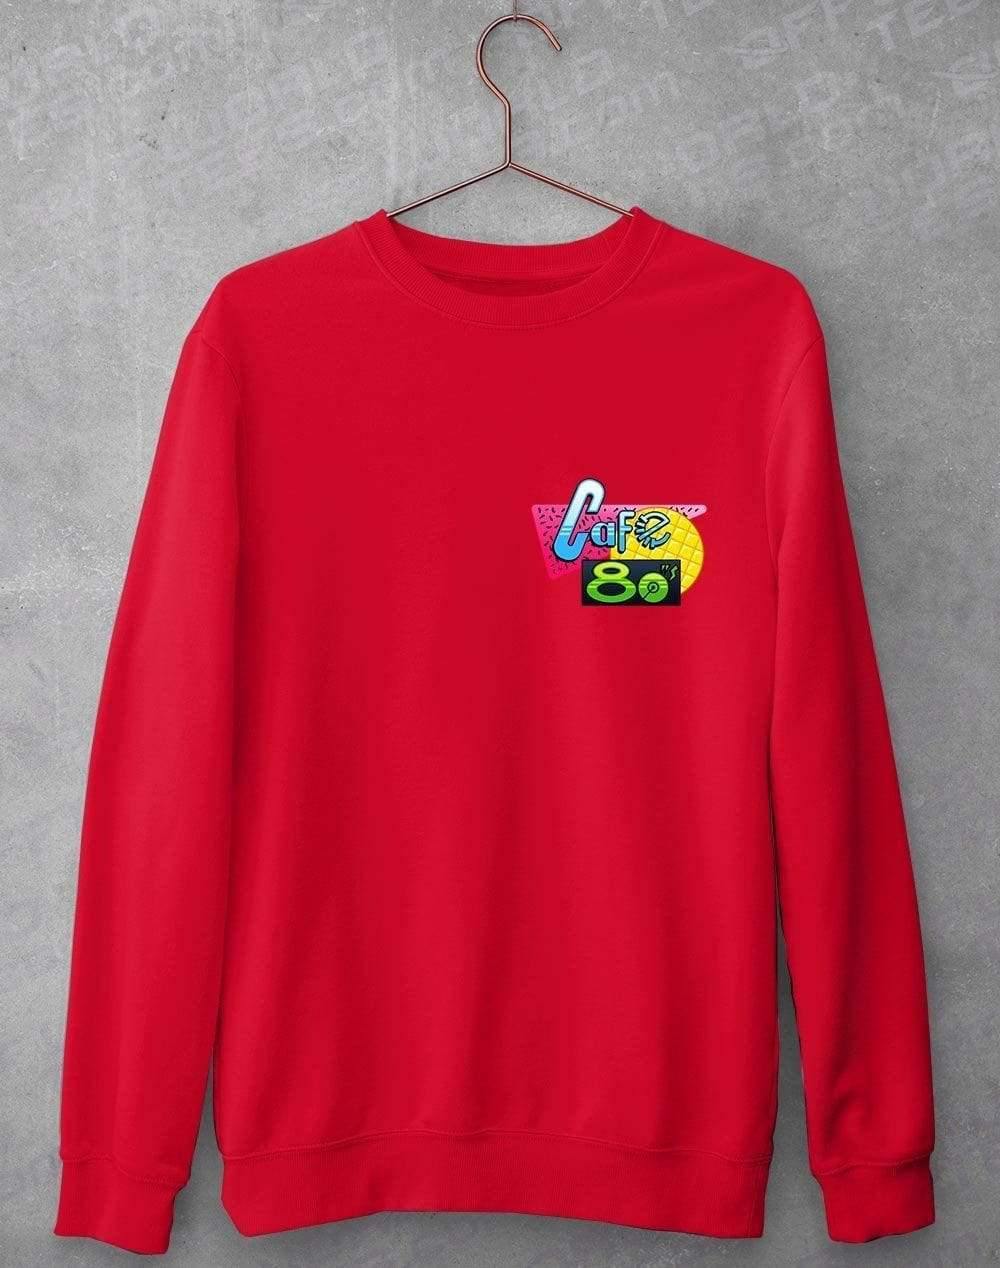 Cafe 80s Pocket Print Sweatshirt S / Fire Red  - Off World Tees